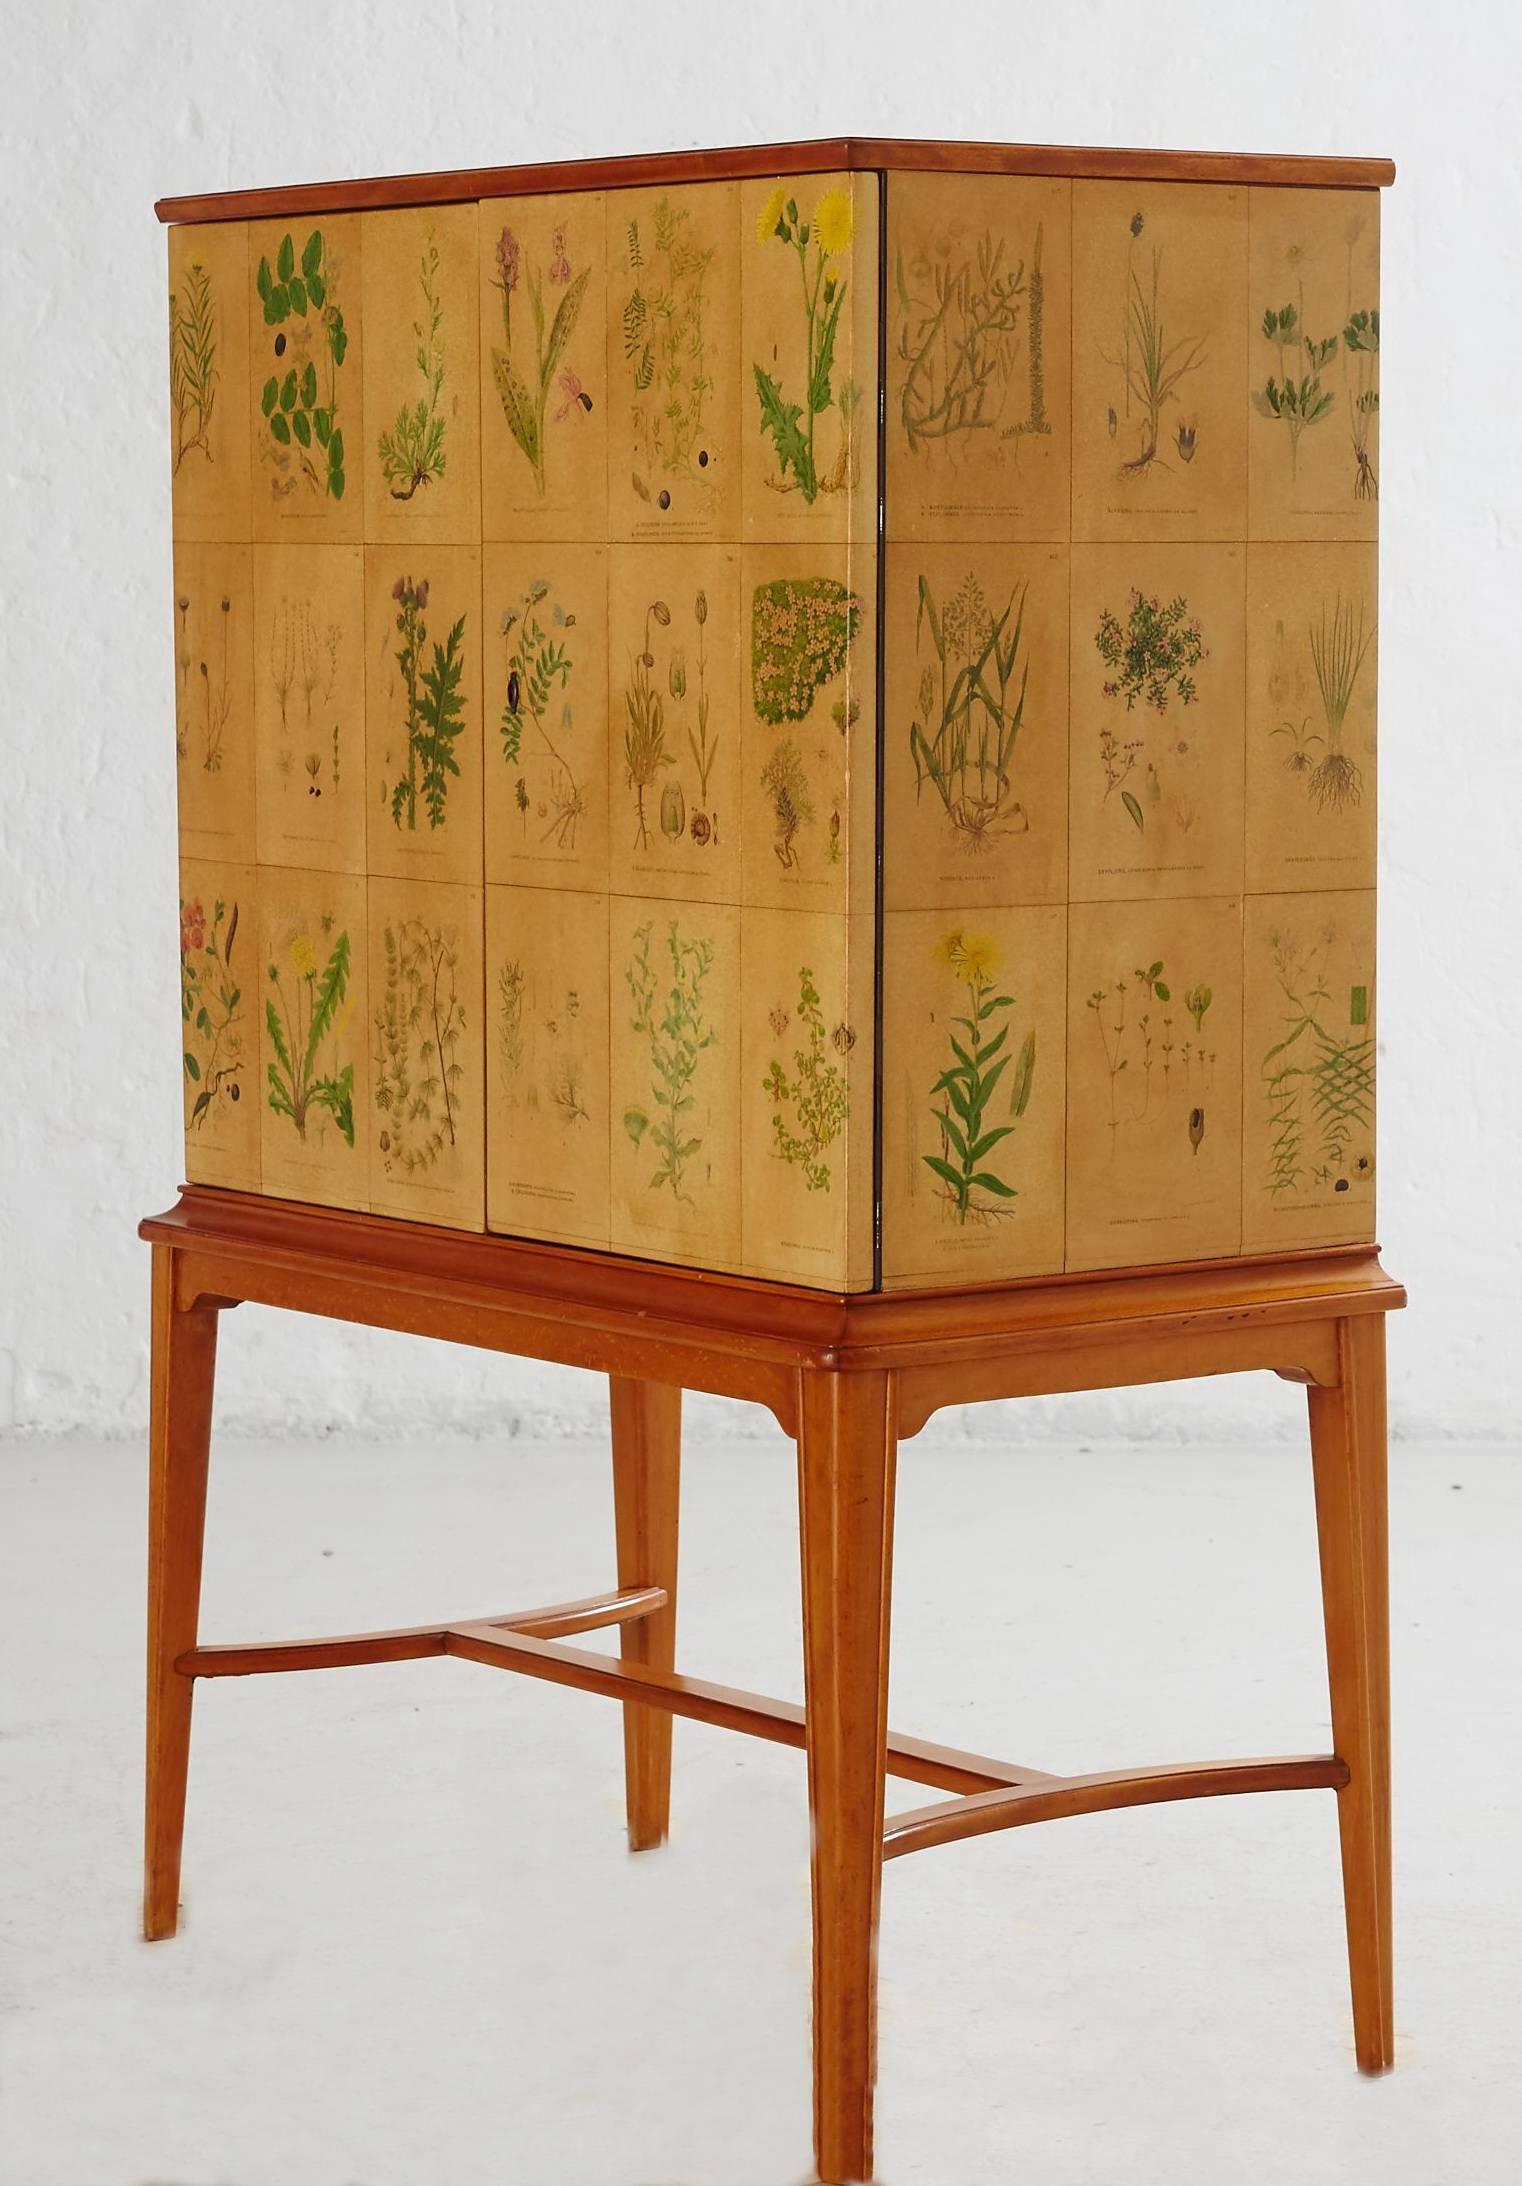 Appliqué Swedish Wooden Cabinet, Upholstered with Etchings of 